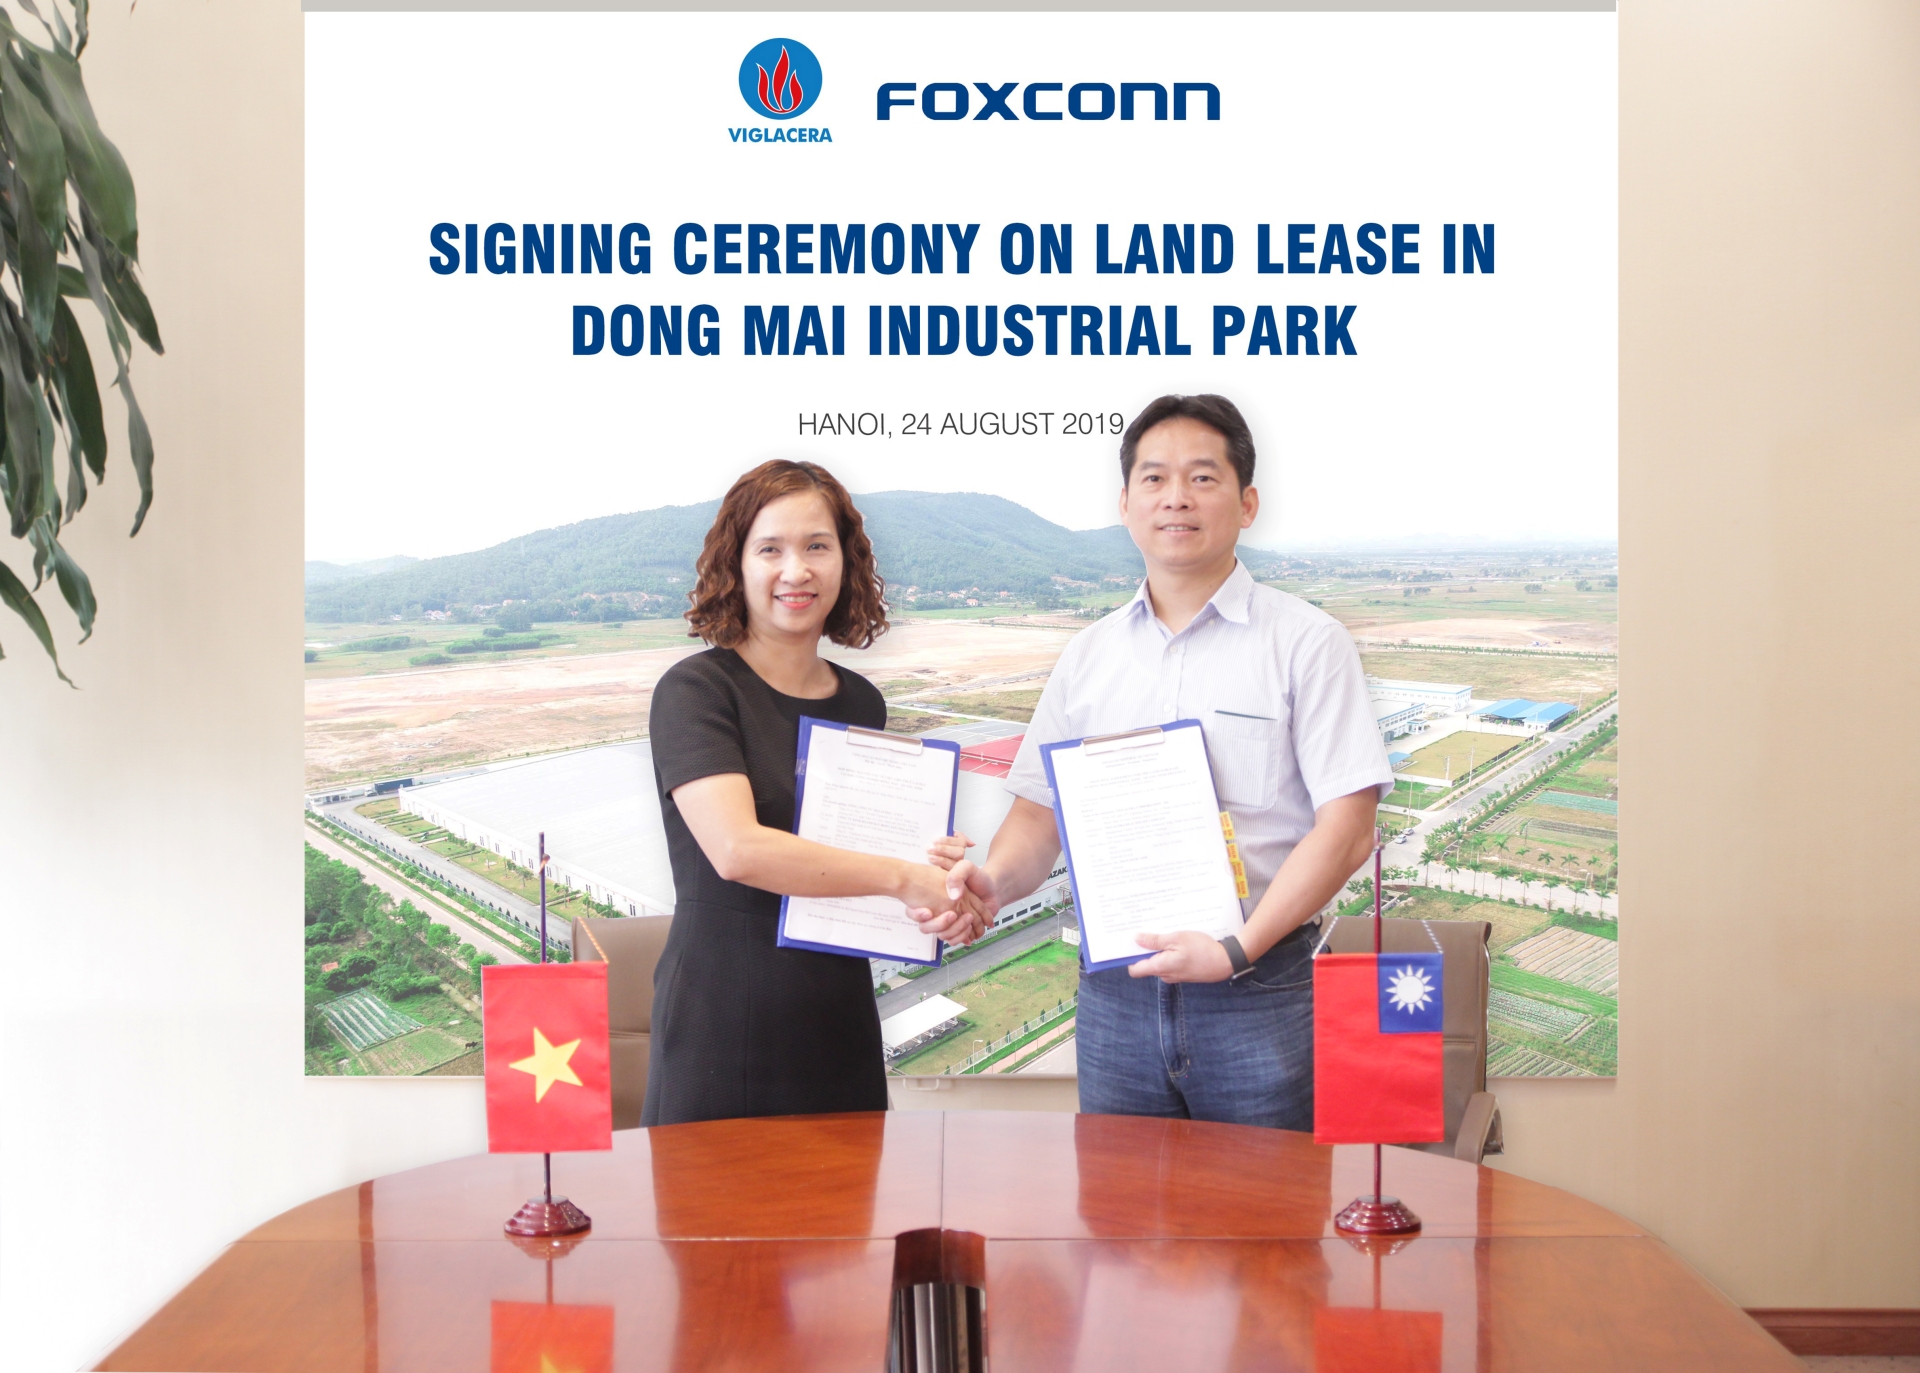 Dong Mai Industrial Park (Viglacera) successfully attracted one of the leading electronics and information technology corporations in the world